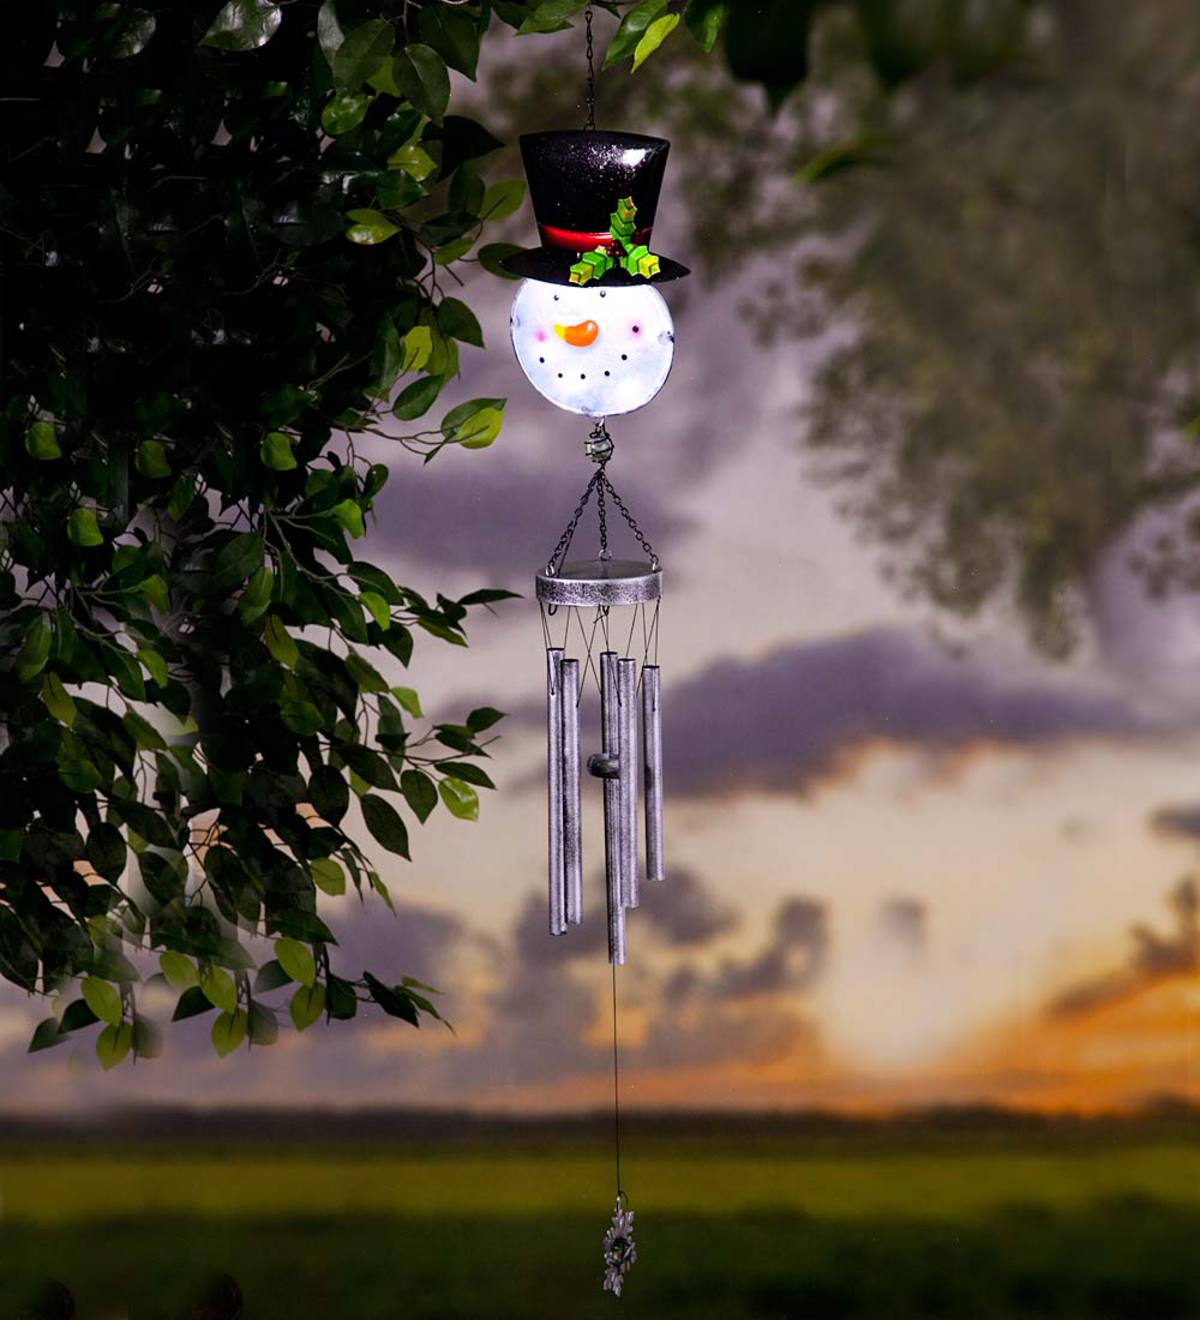 Amazon.com : AVEKI Solar Wind Chimes Outdoor, Color-Changing Solar Mobile Wind  Chime Waterproof Solar Powered LED Hanging Lamp for Outdoor Garden Festival  Decoration (Dragonfly) : Patio, Lawn & Garden